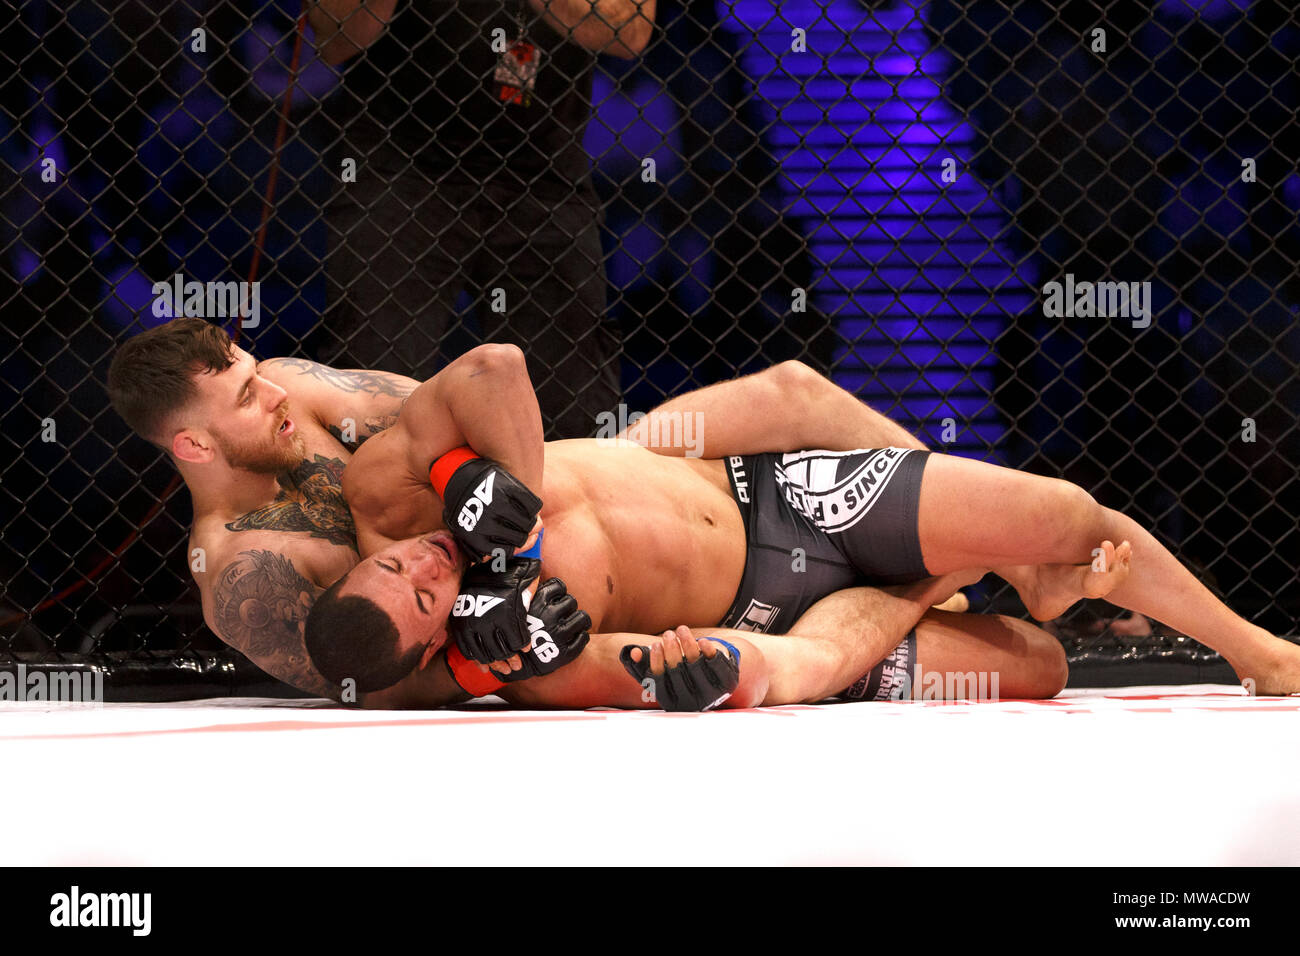 Eden Newton (left) with Azi Thomas in a submission hold at ACB 54 in Manchester, UK. Absolute Championship Berkut, Mixed Martial Arts, MMA fight. Stock Photo